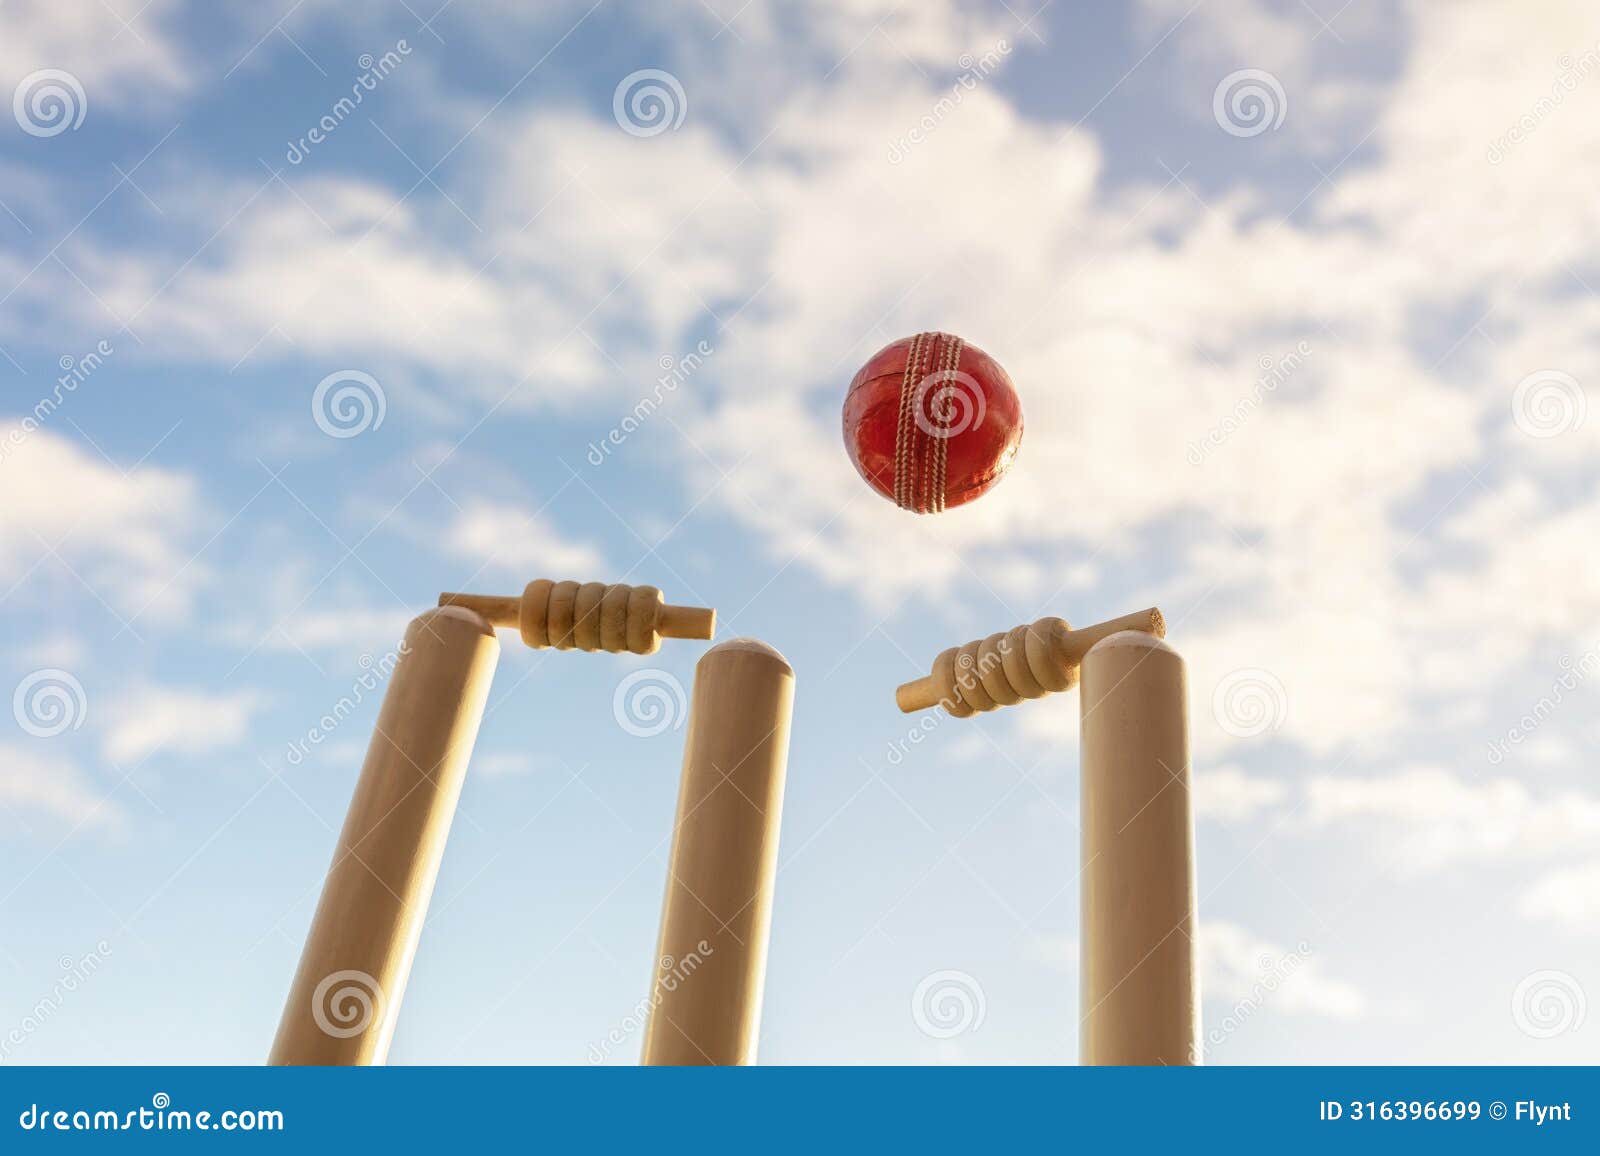 cricket ball hitting wicket stumps and bails background